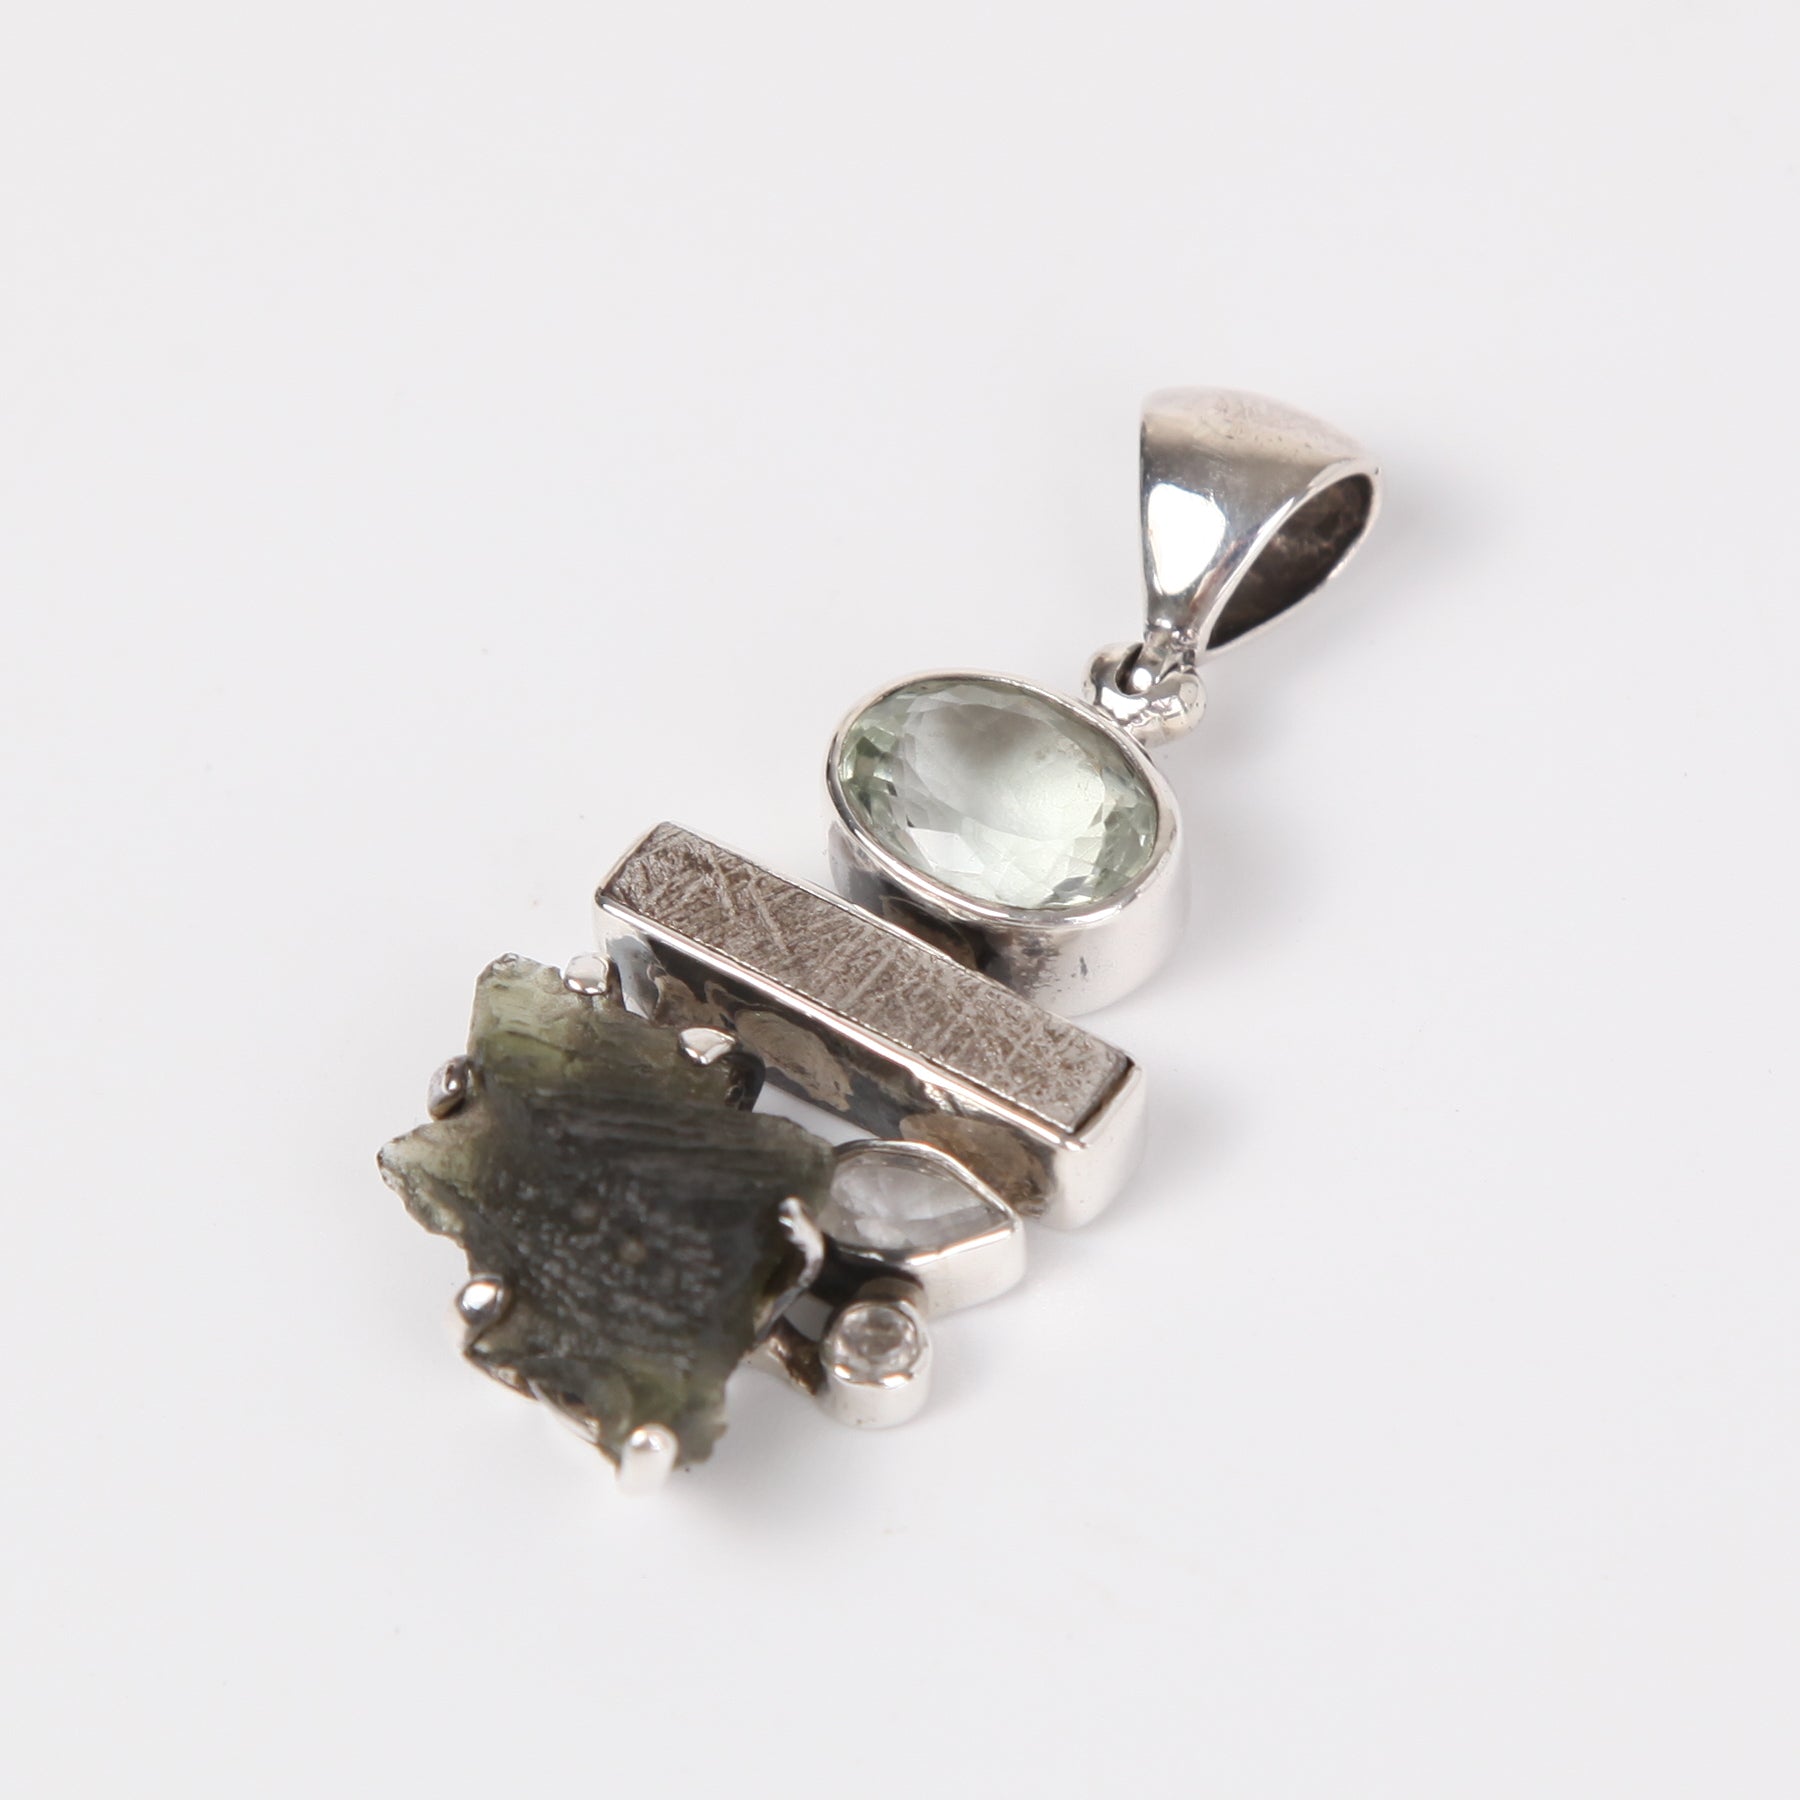 Iron Nickle Meteorite Pendant with Green Amethyst, Moldavite, White Topaz and Sterling Silver